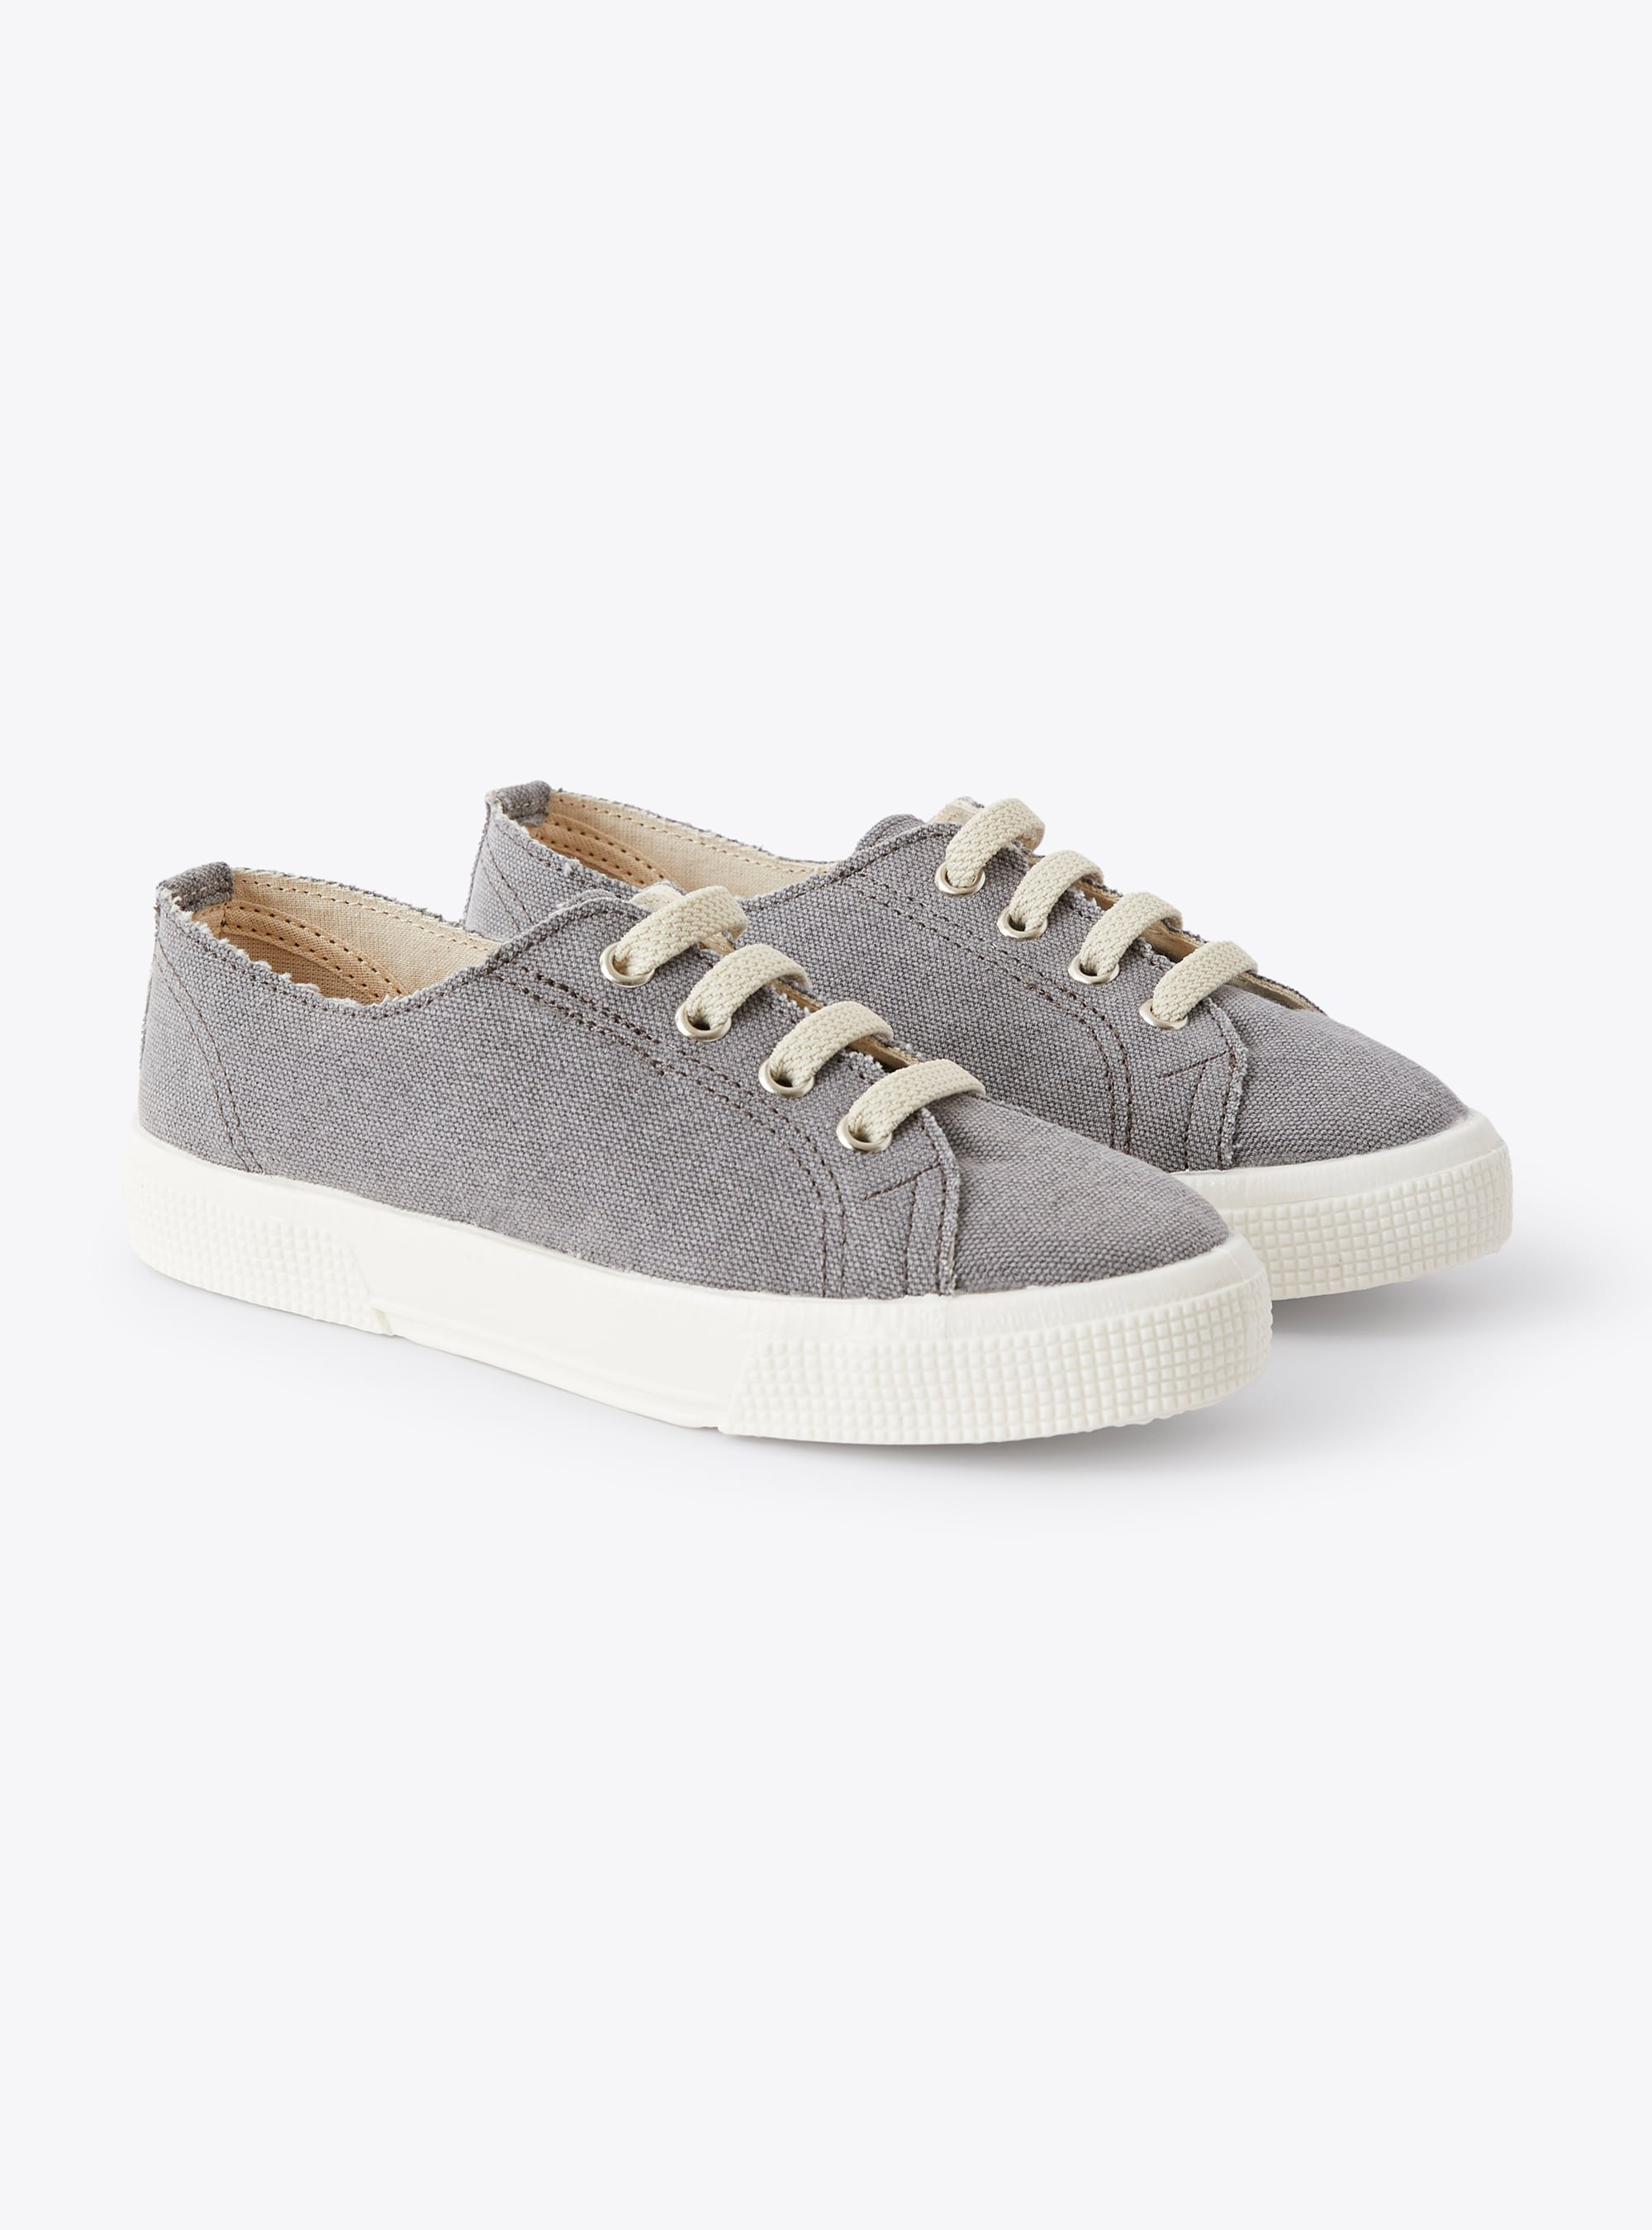 Sneaker in grey canvas with laces - Shoes - Il Gufo